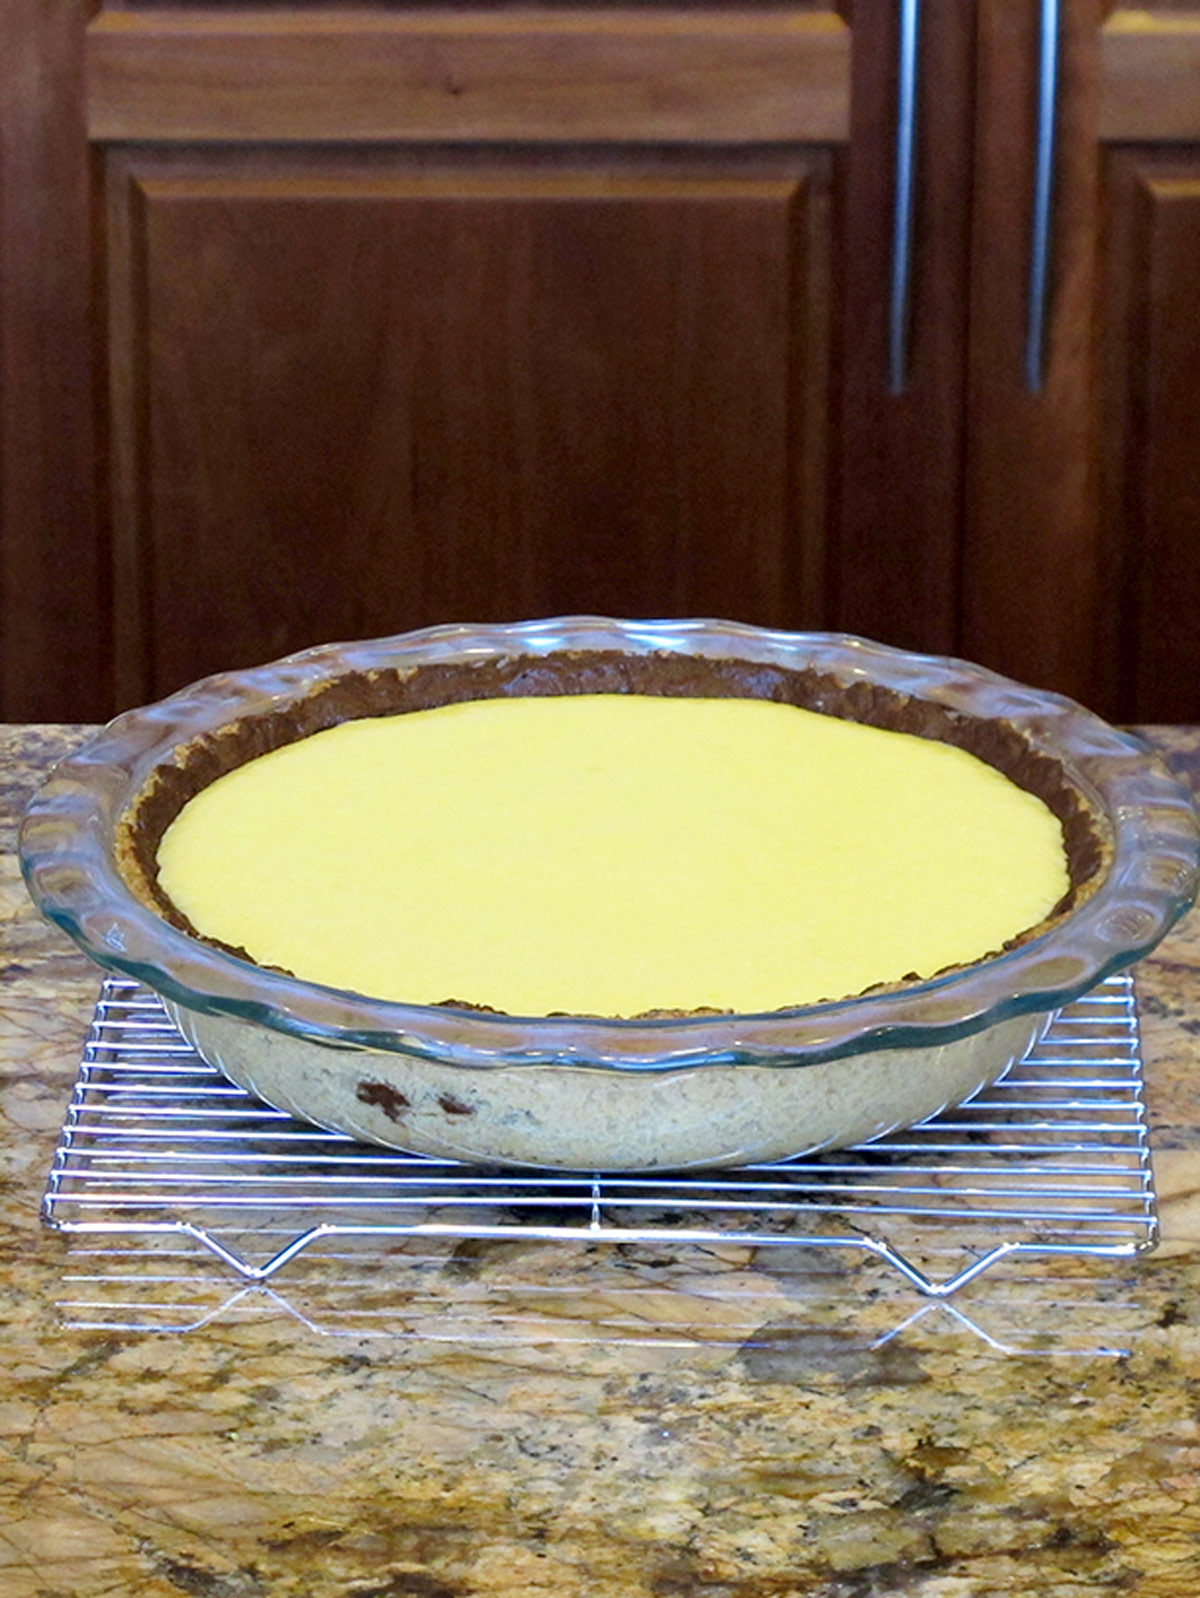 Chocolate key lime pie filling baking sitting on a cooling rack on the counter.